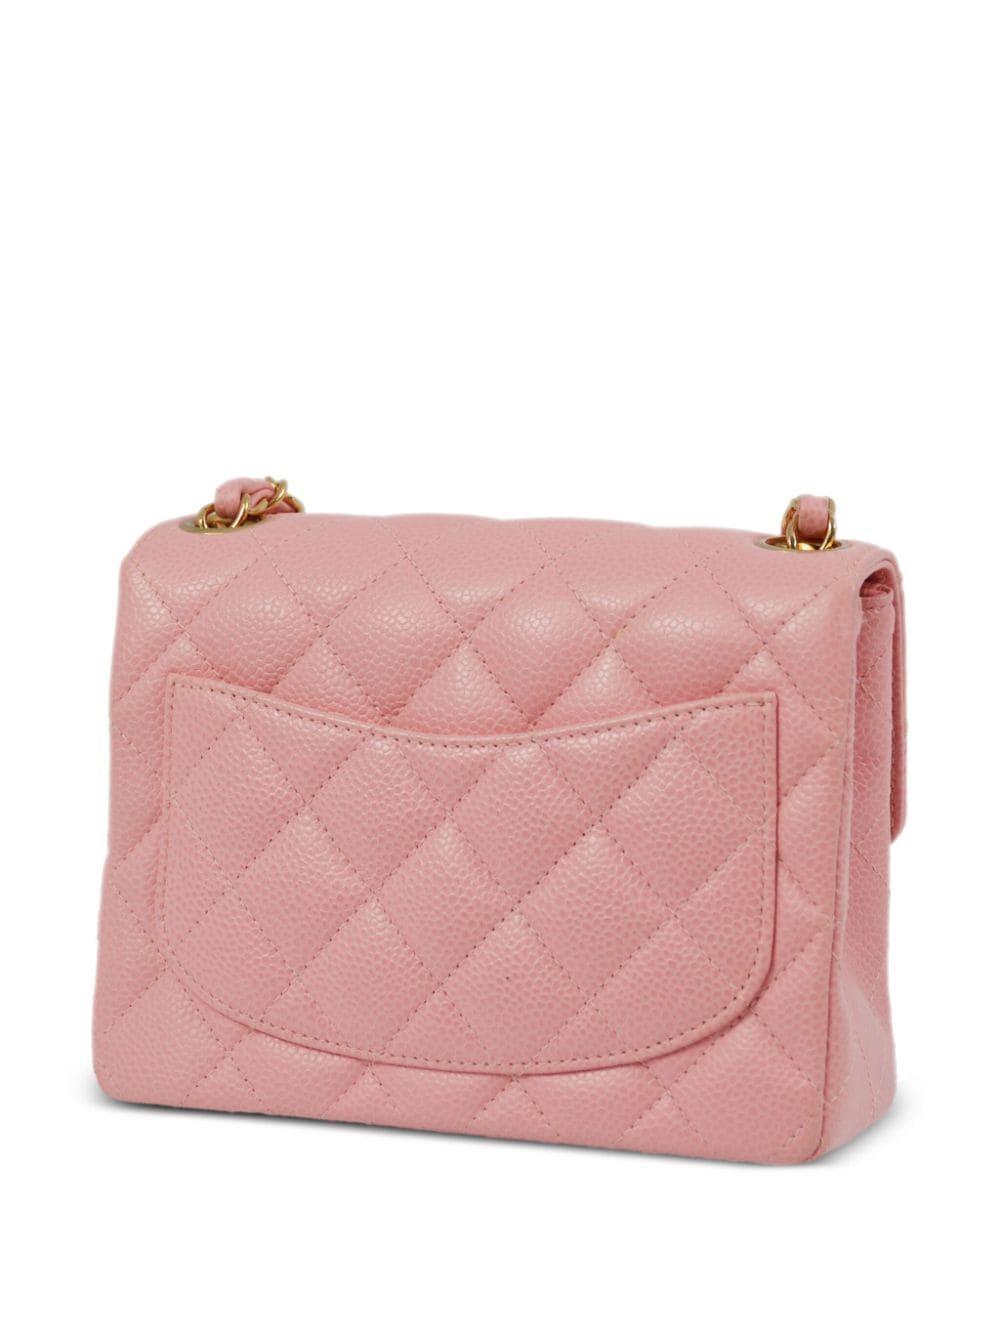 CHANEL Pre-Owned 2005 mini Classic Flap shoulder bag - Pink